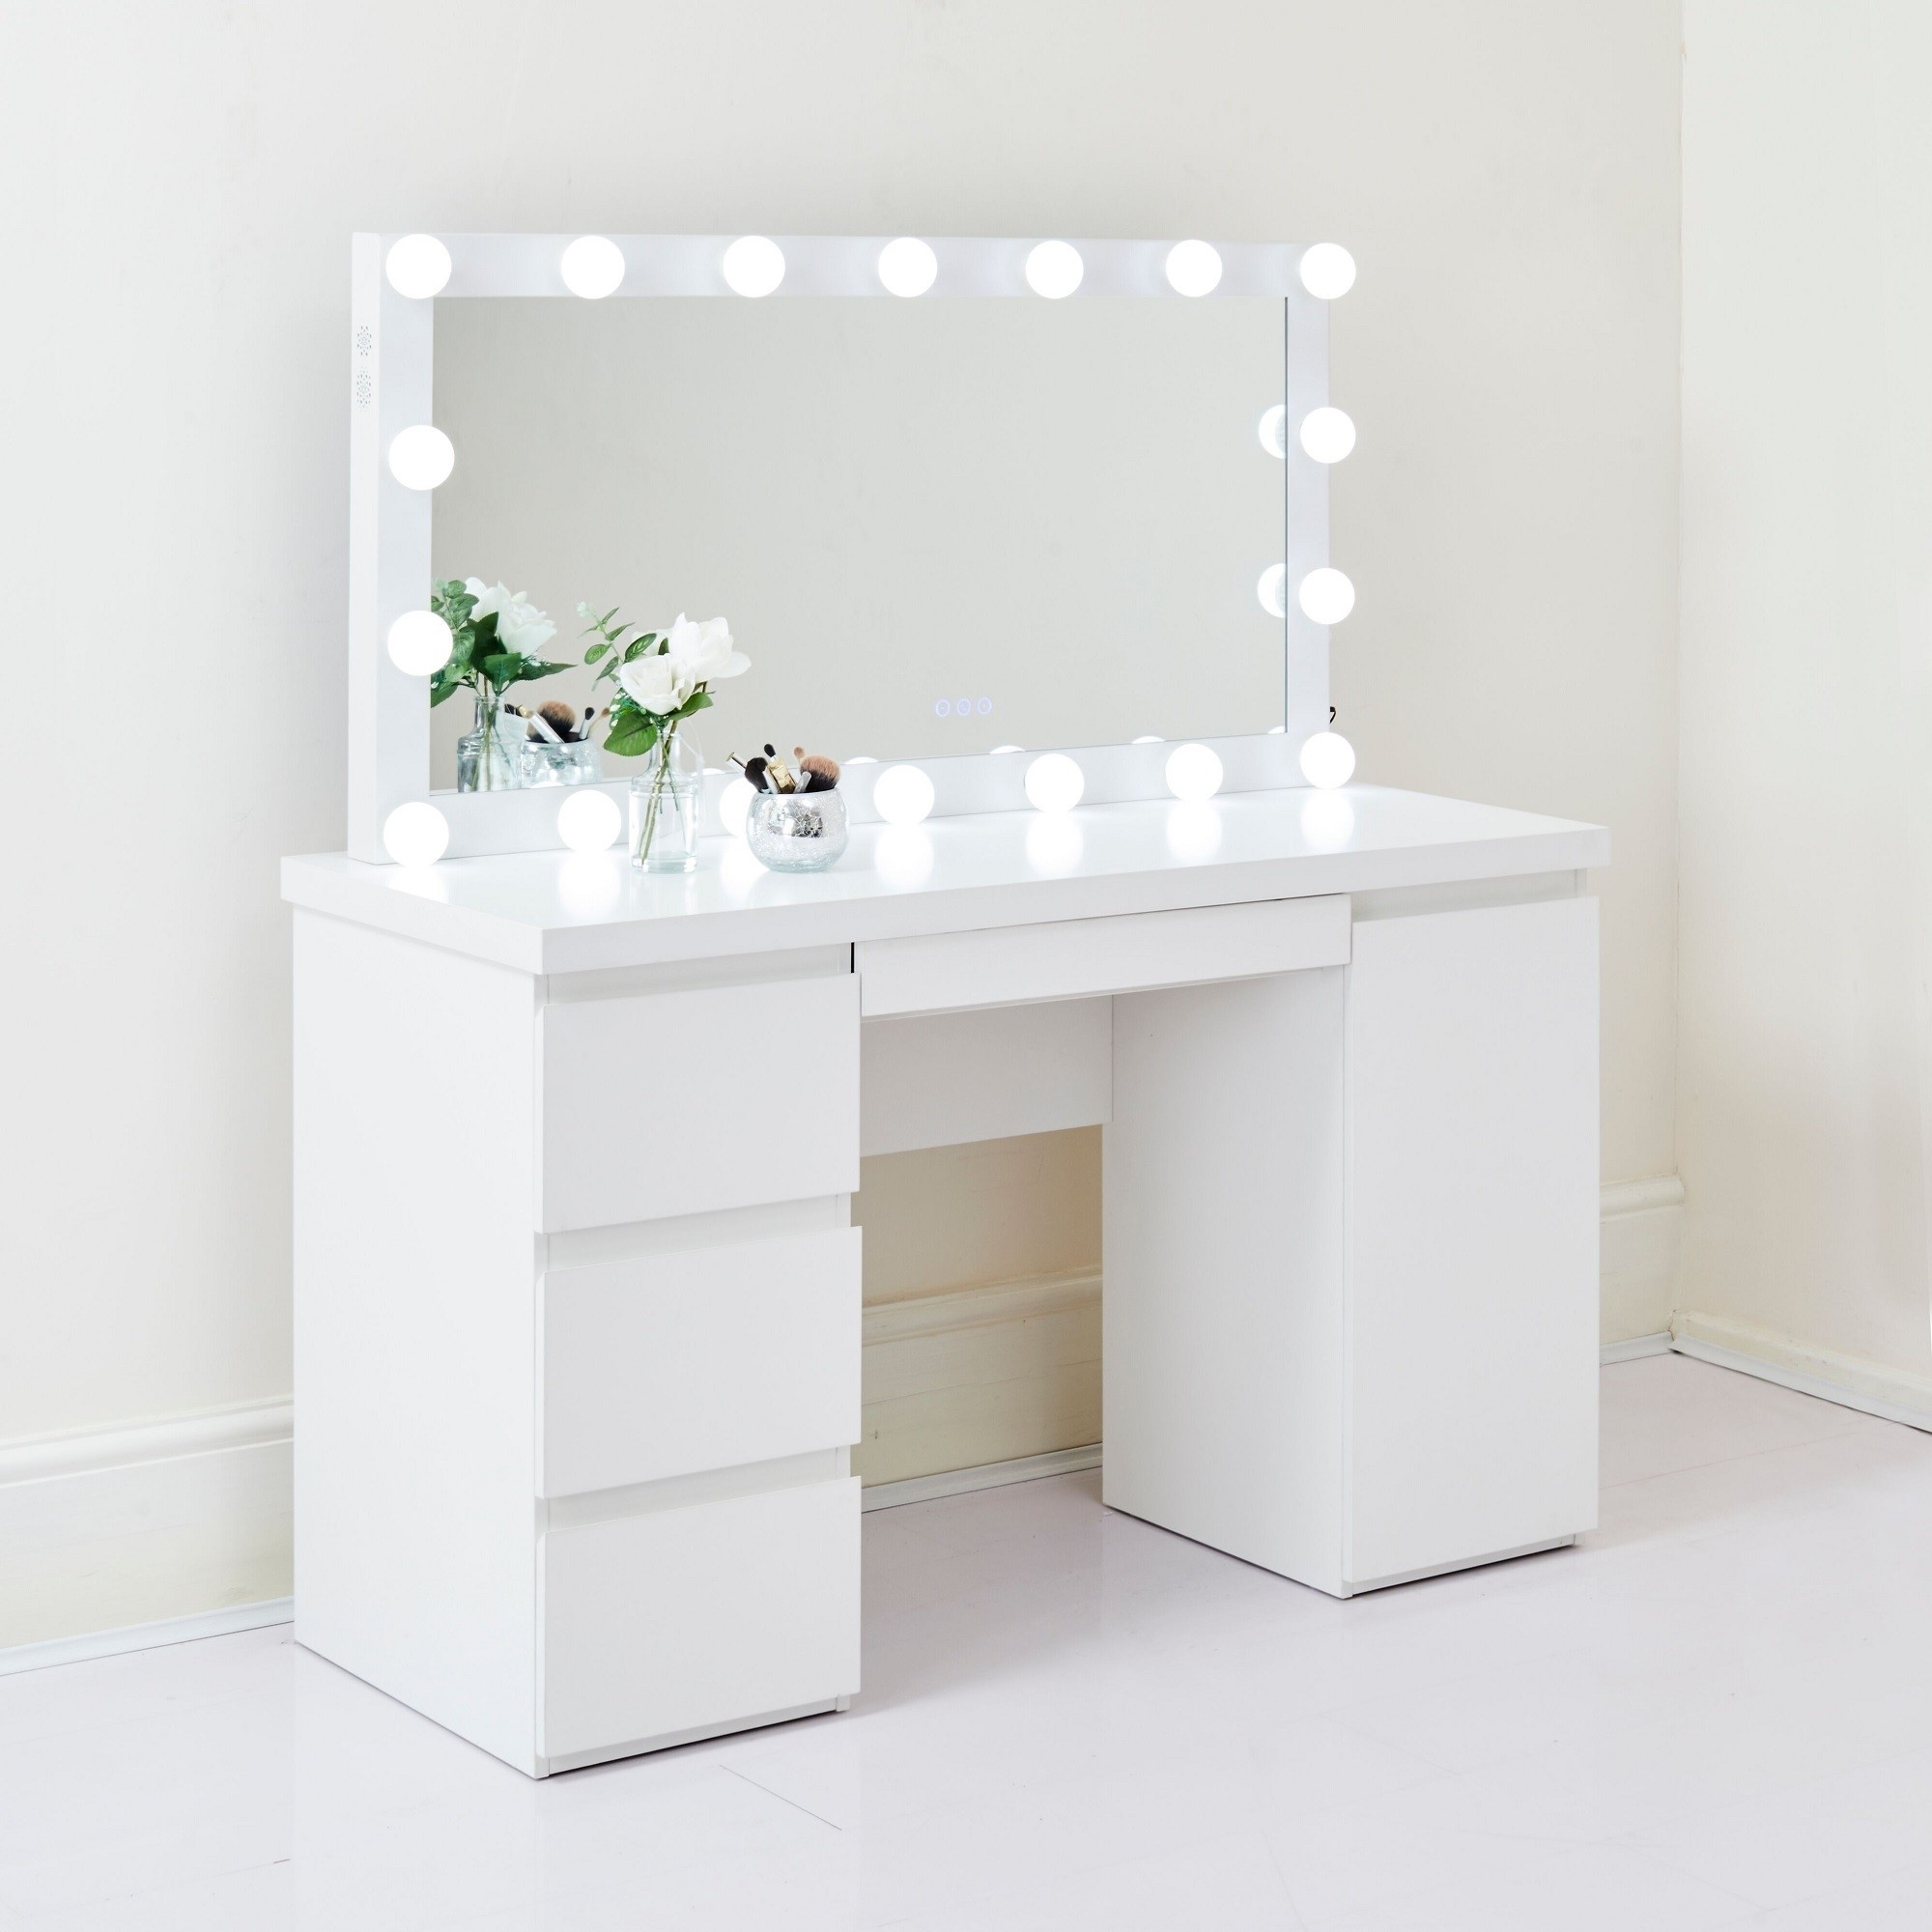 Led hollywood mirror with dressing table bulb lights